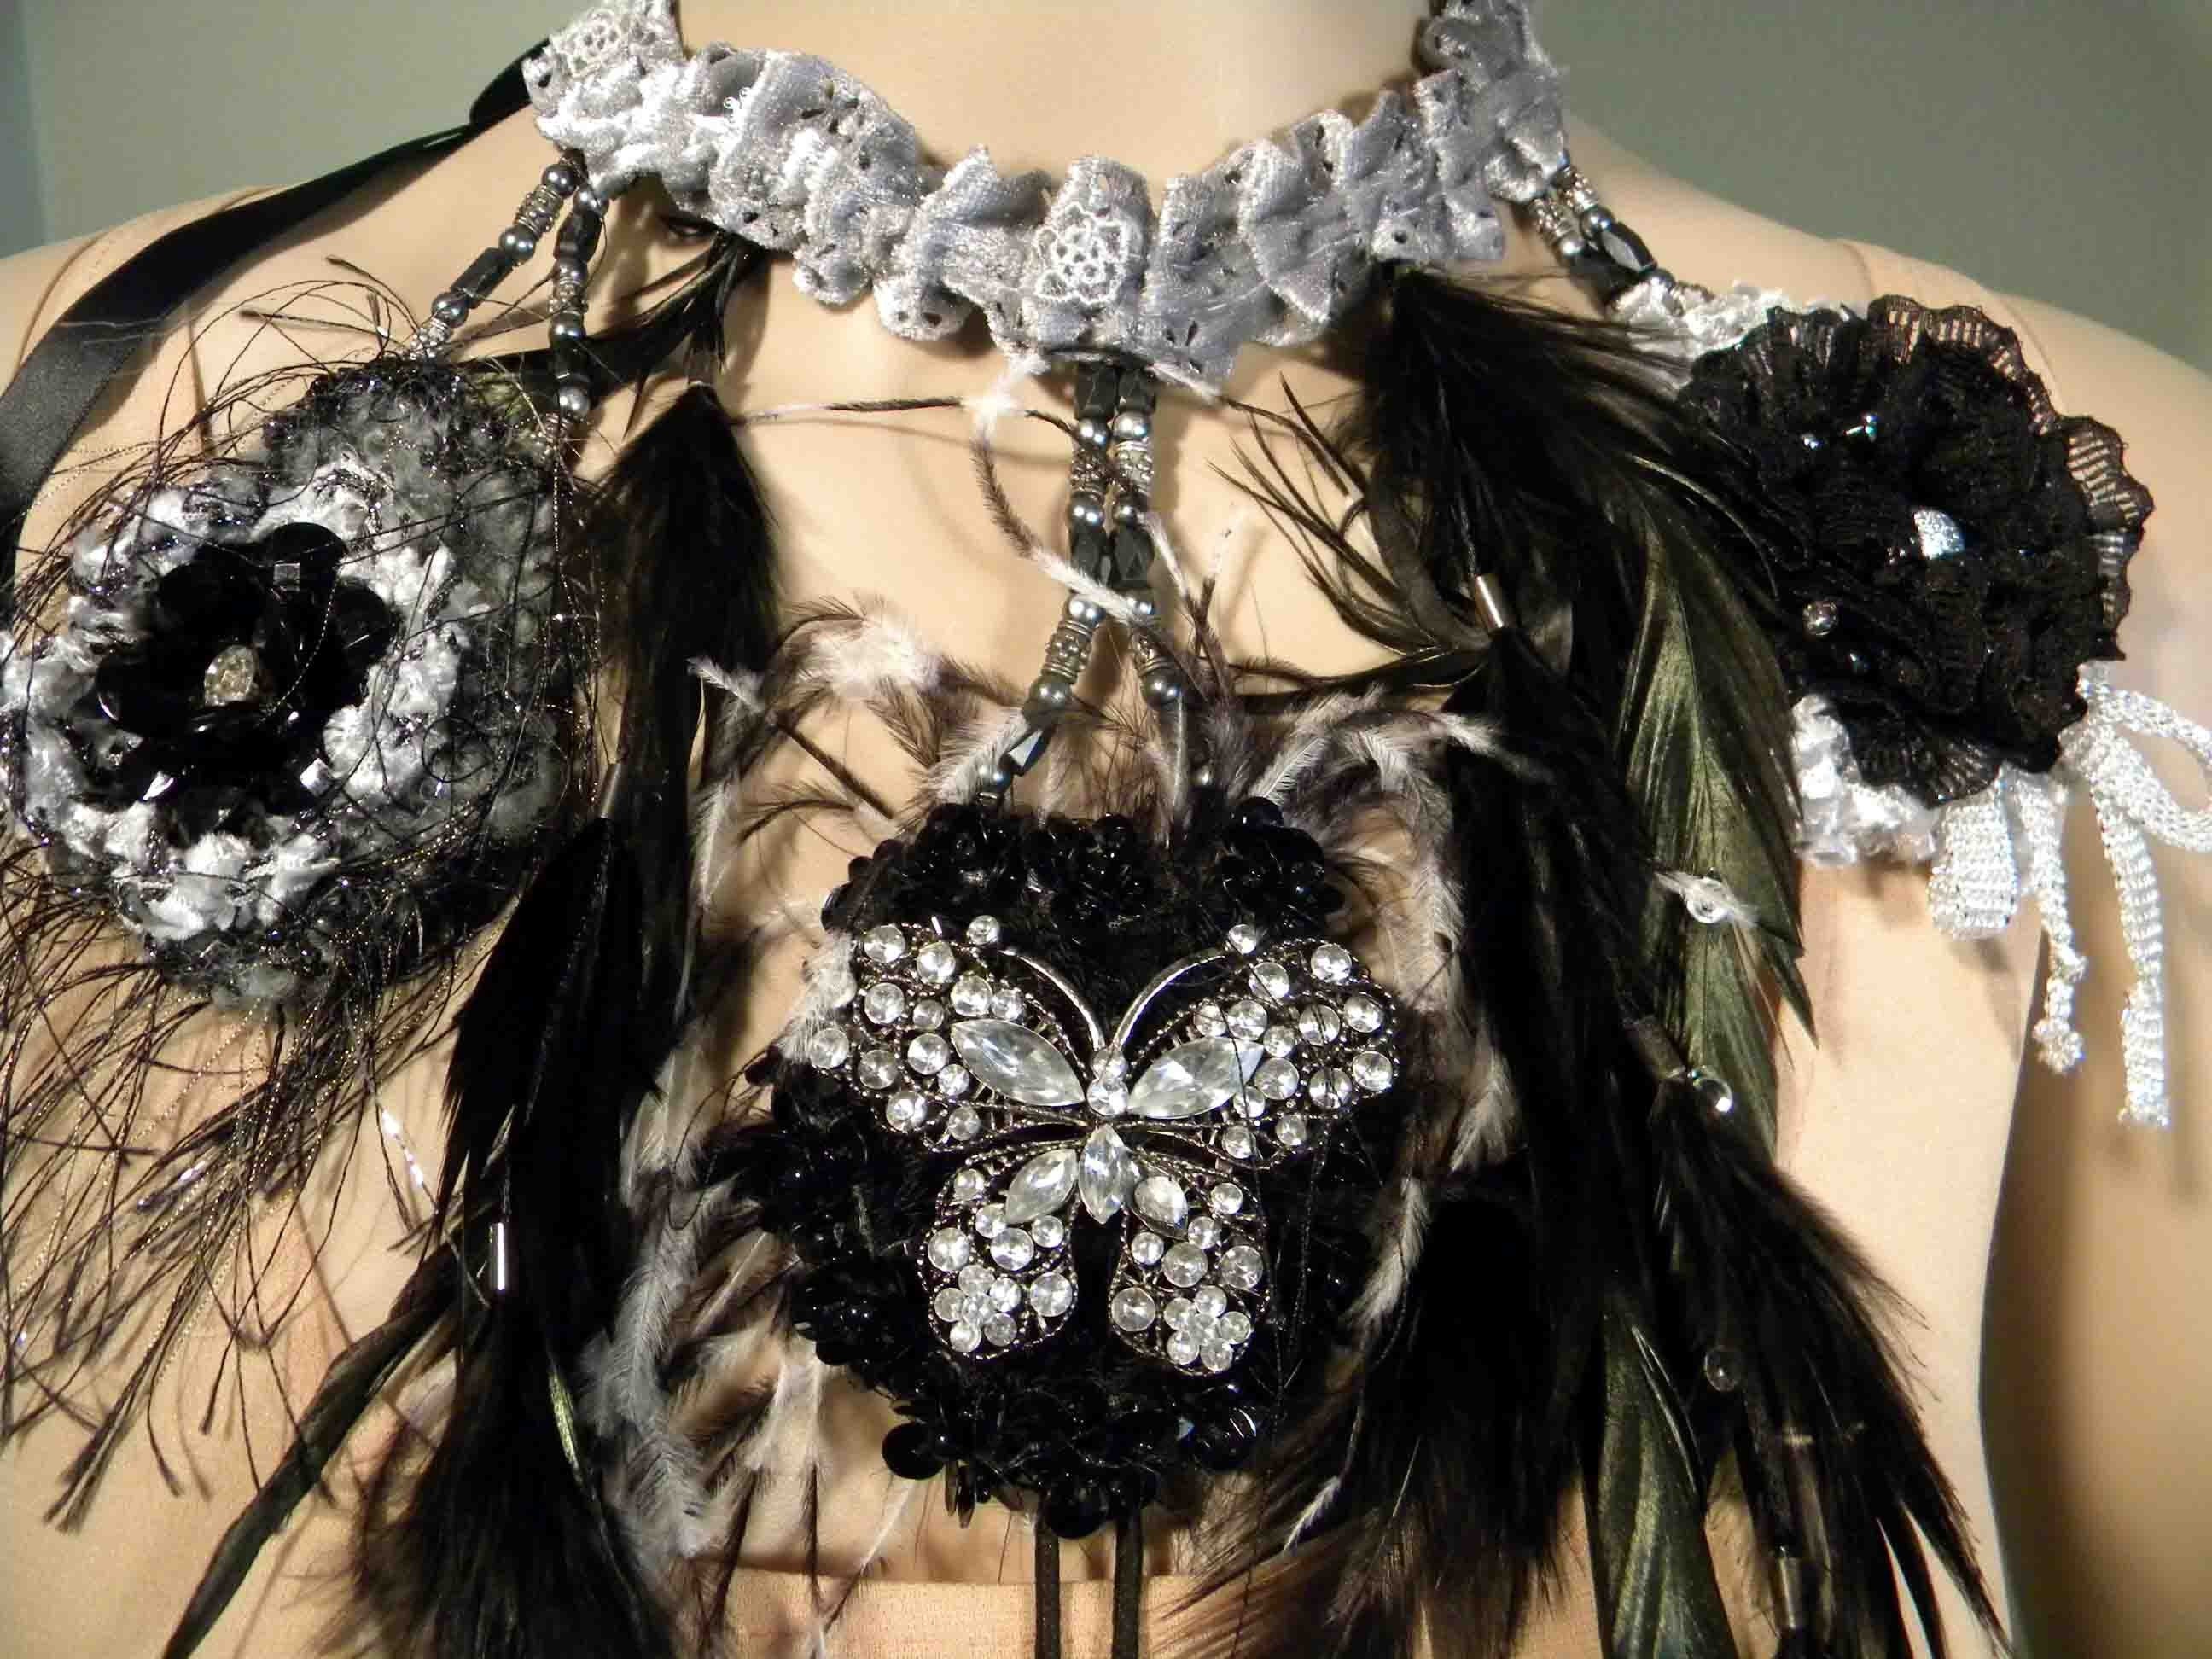 Black and
Silver Crochet Flowers and Feather Necklace